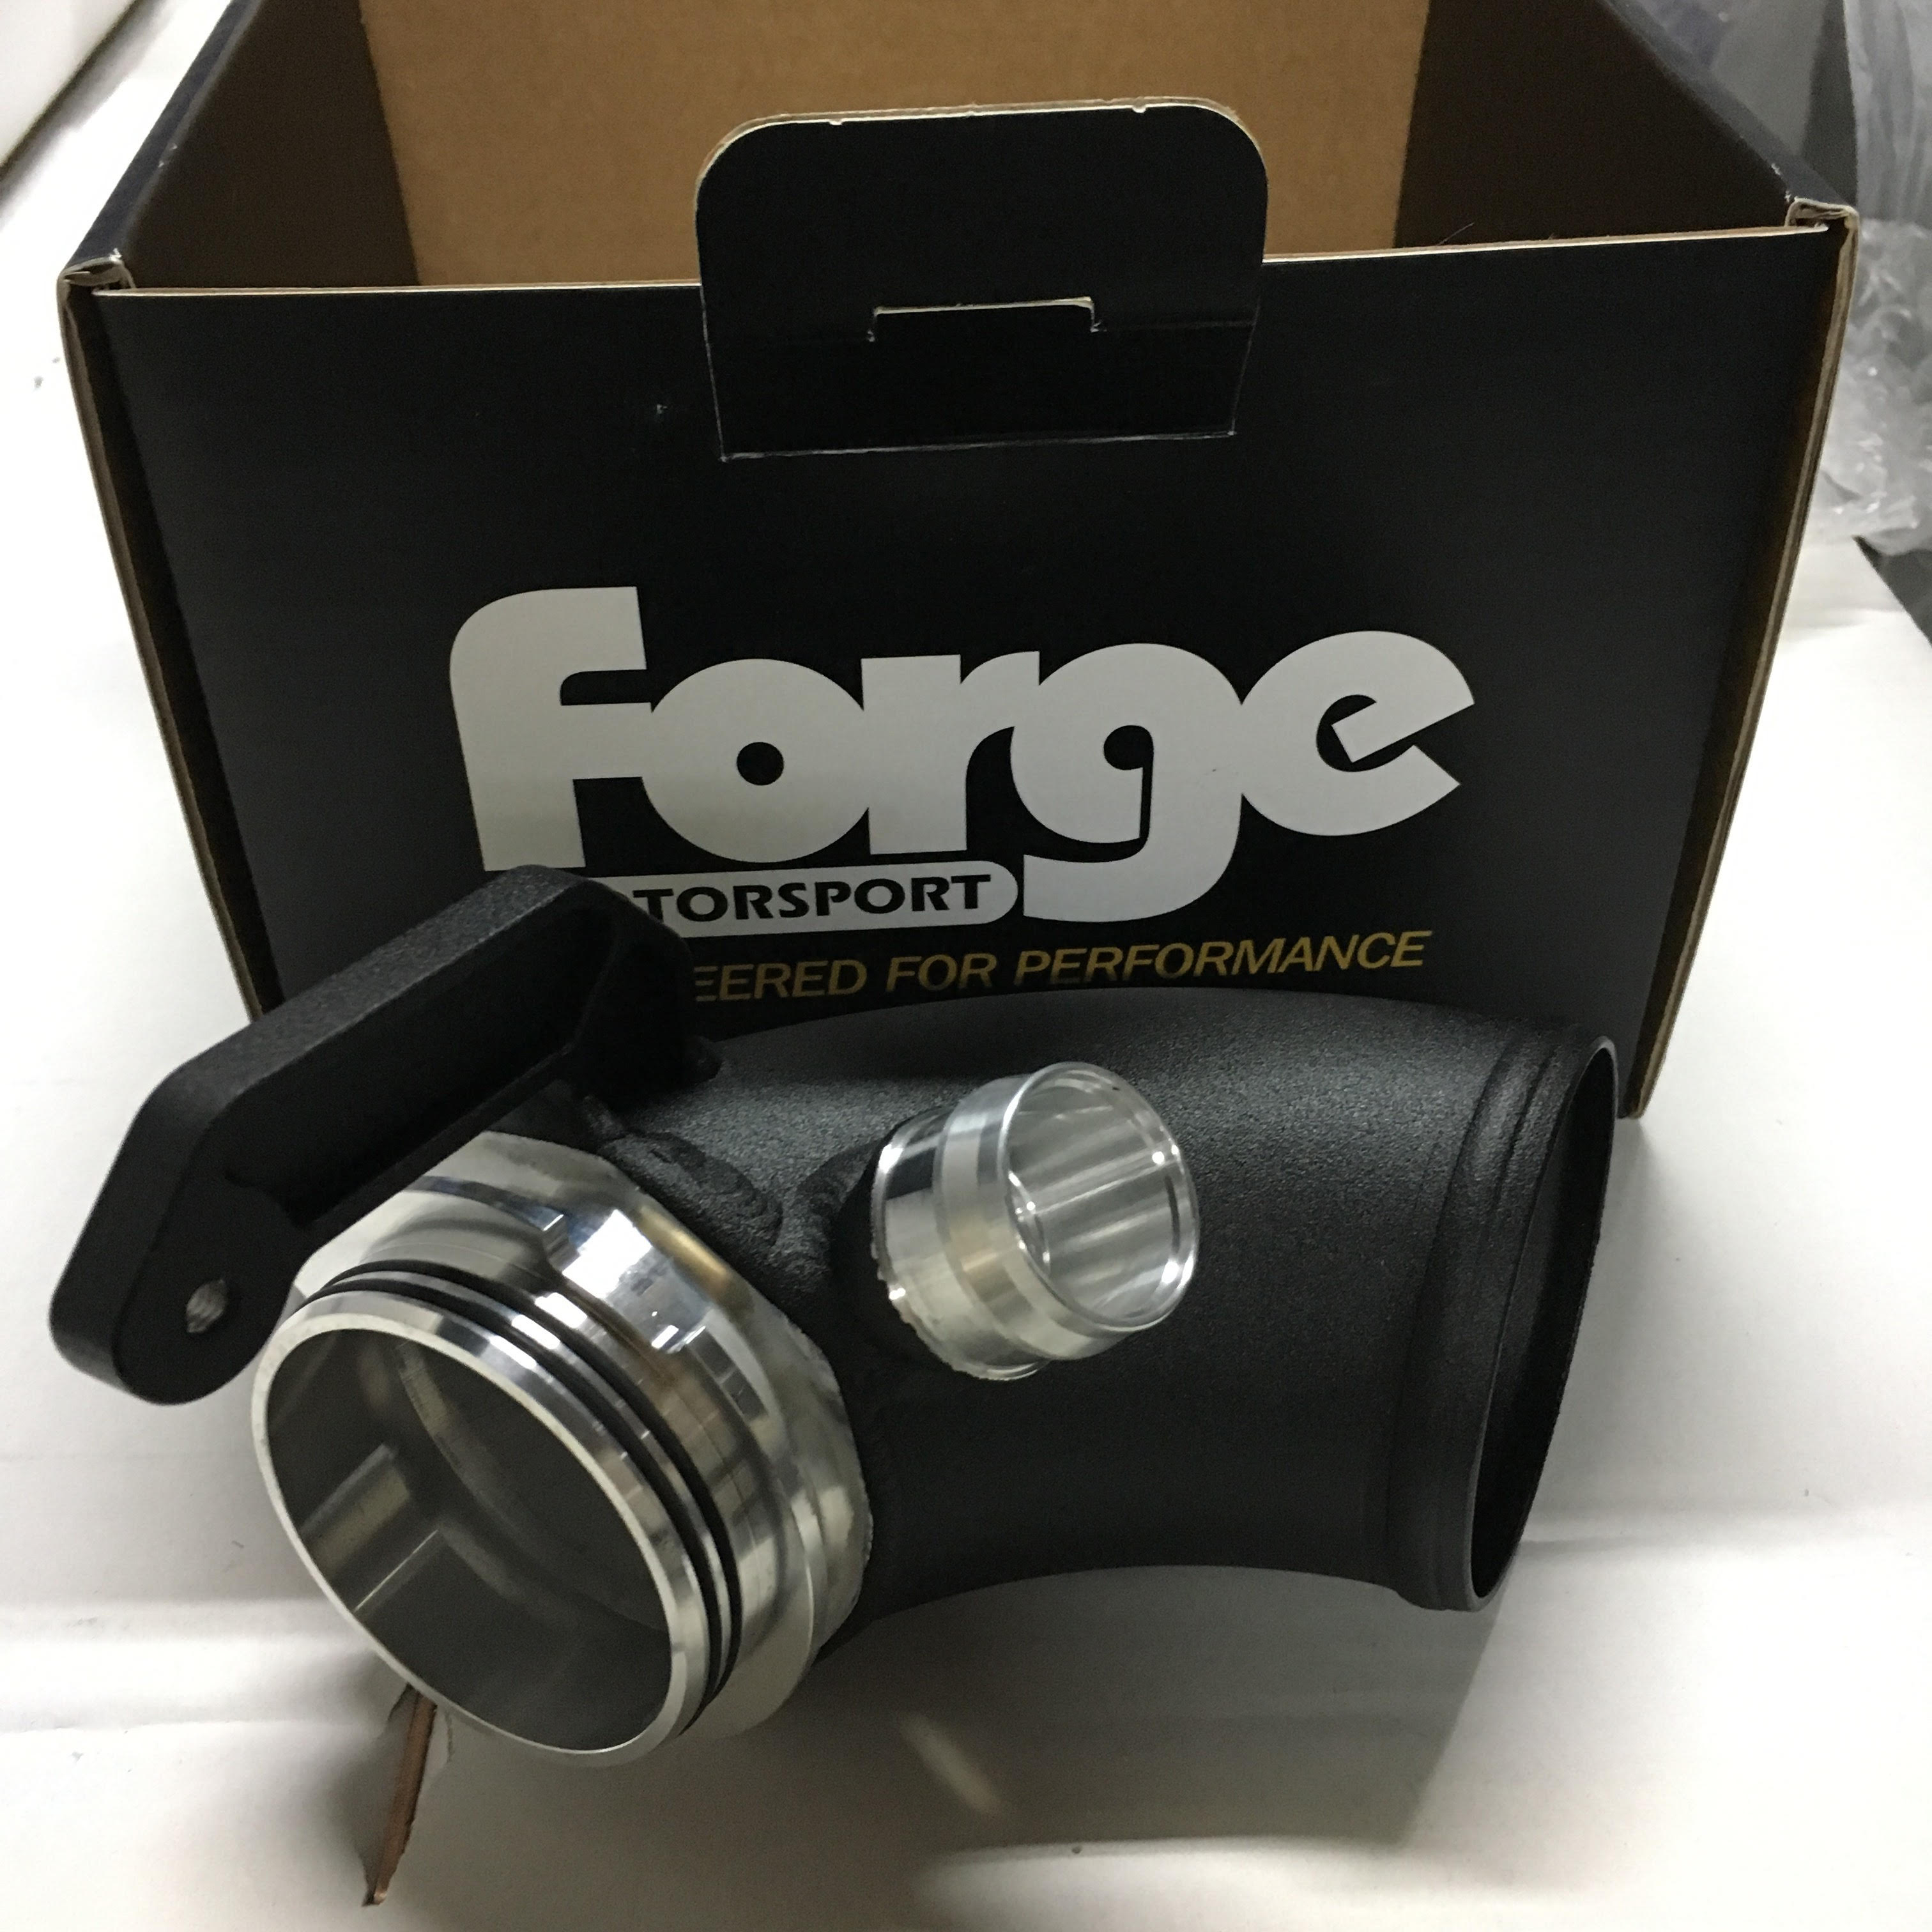 FORGE FMTIA1 Alloy Turbo Inlet Adaptor for VW Golf 7 GTI, Golf 7 Clubsport, Golf 7.5 GTI, Golf 7 R, Golf 7.5 R, AUDI S3 (8V) Photo-3 